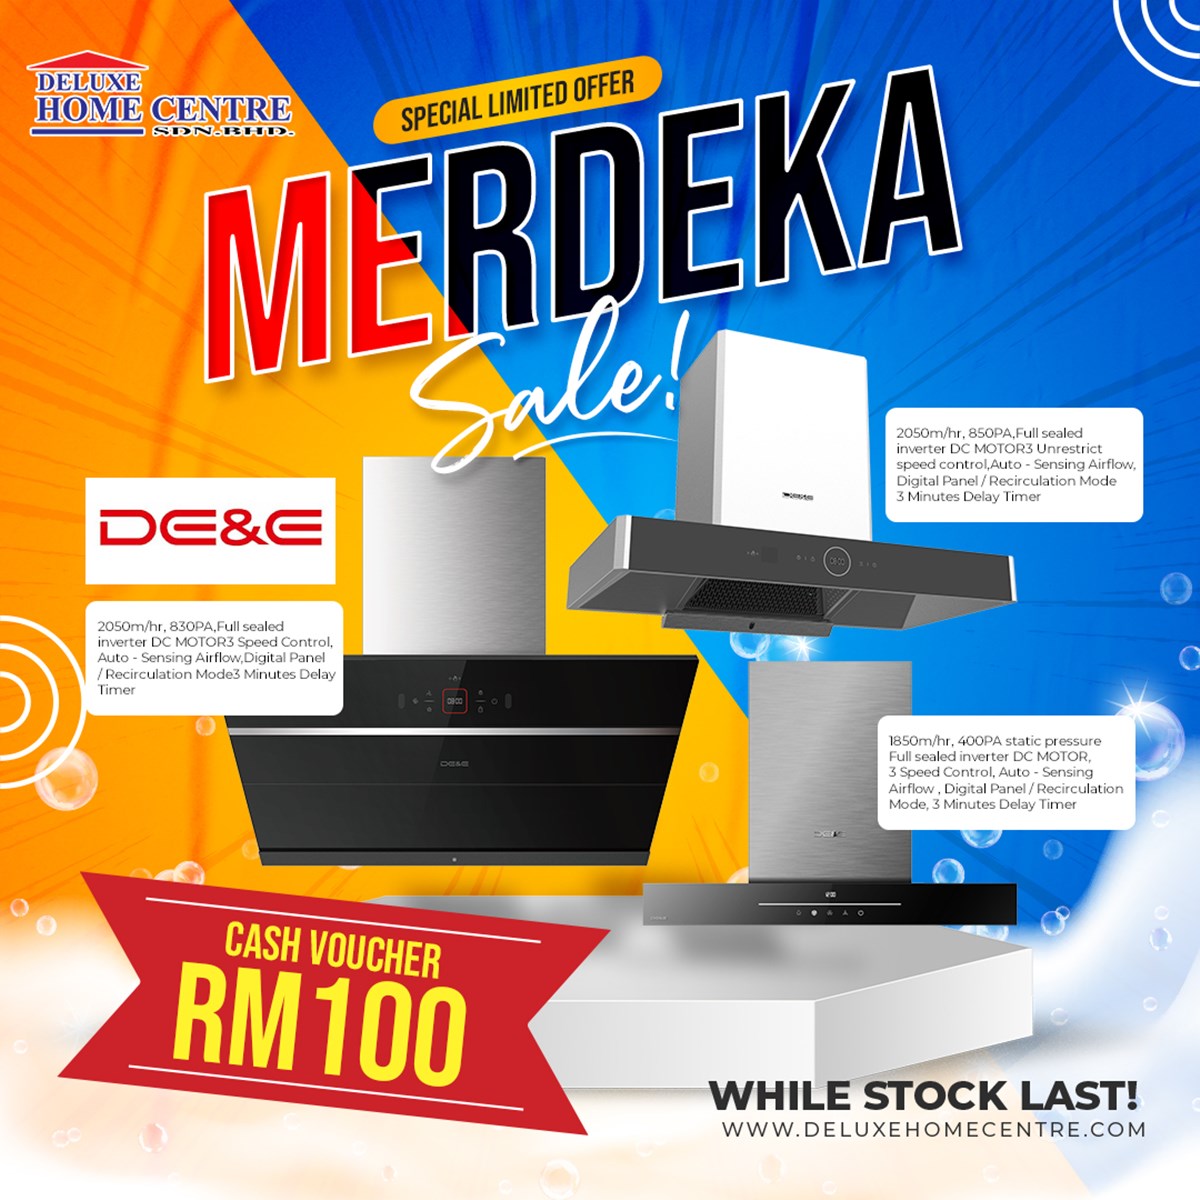 Deluxe Home Centre Sdn Bhd